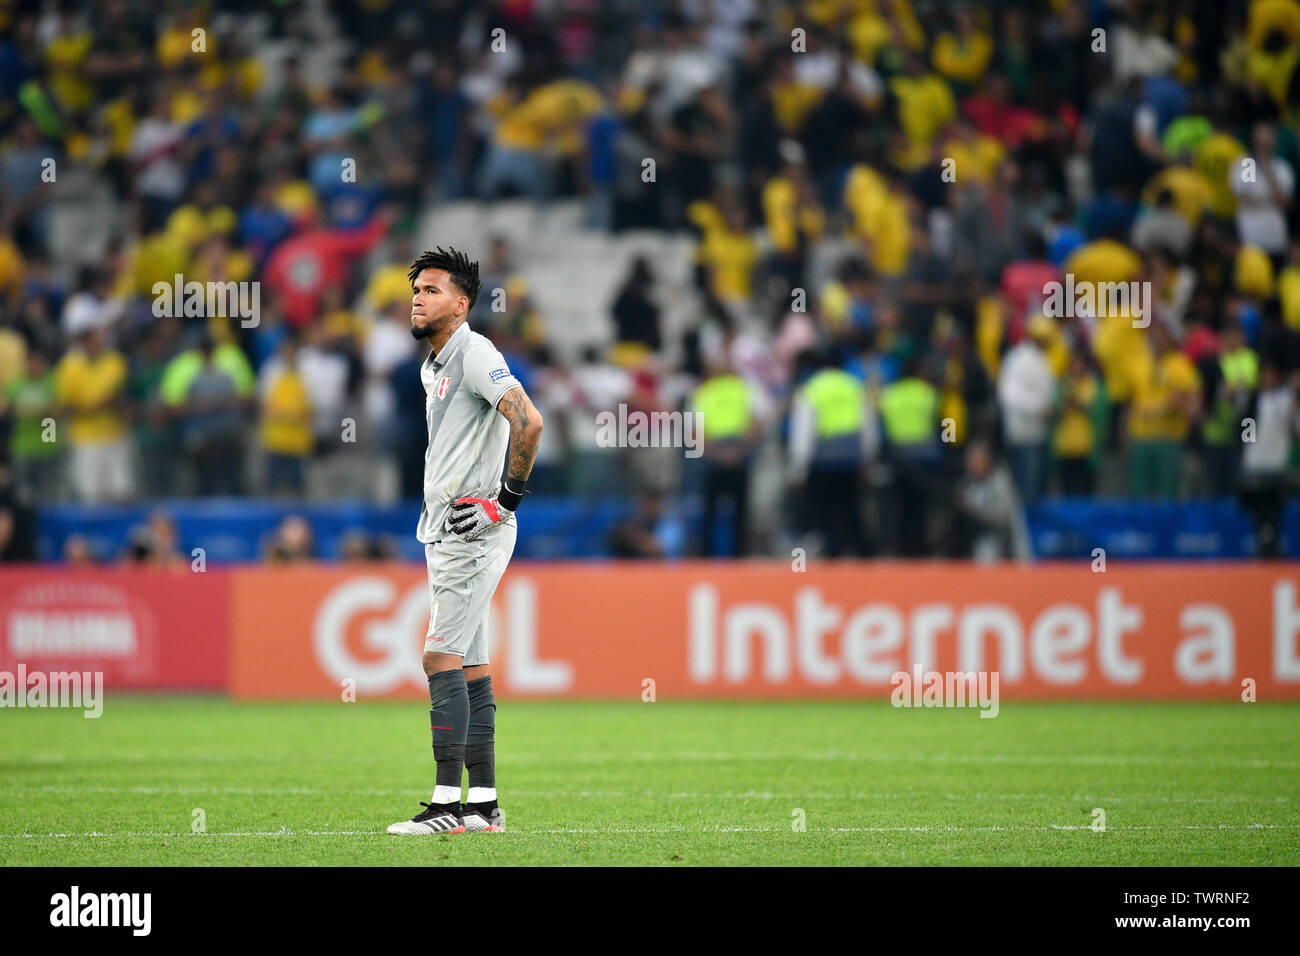 Sao Paulo, Brazil. 22nd June, 2019. Peru's goalkeeper Pedro Gallese reacts after the Group A match between Brazil and Peru at the Copa America 2019, held in Sao Paulo, Brazil, June 22, 2019. Brazil won 5-0. Credit: Xin Yuewei/Xinhua/Alamy Live News Stock Photo